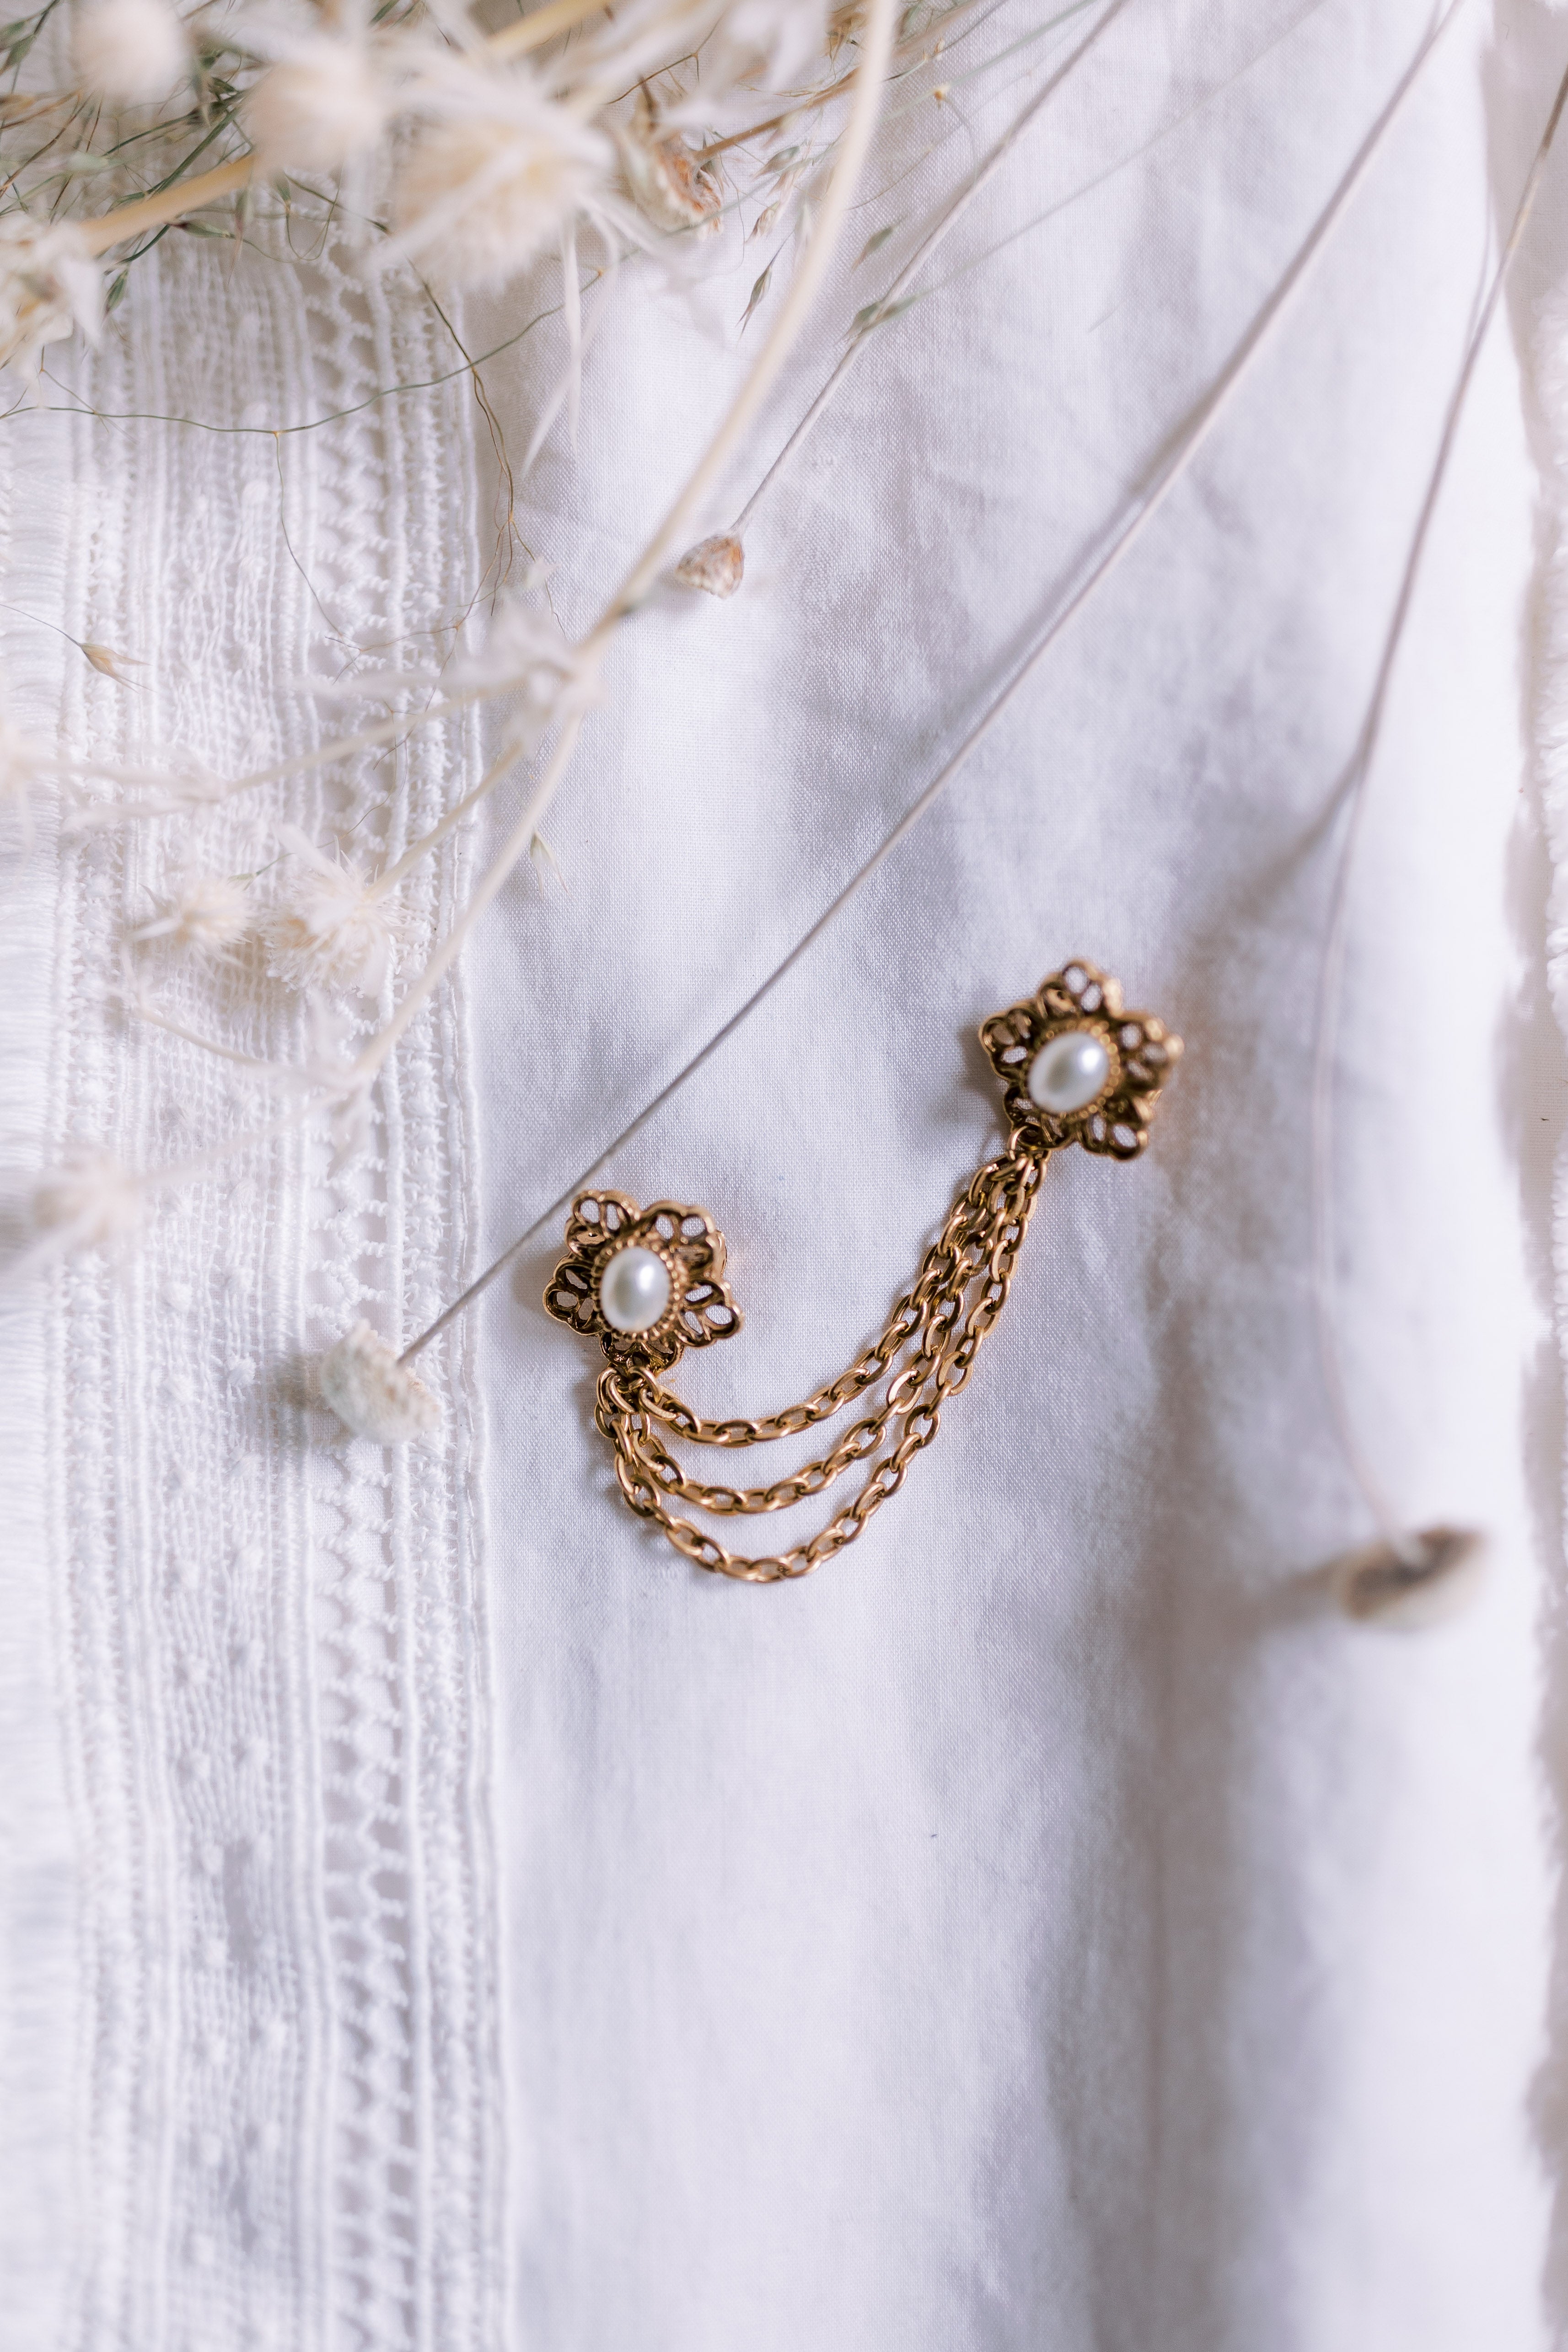 Vintage Floral Pearl Chain Pin